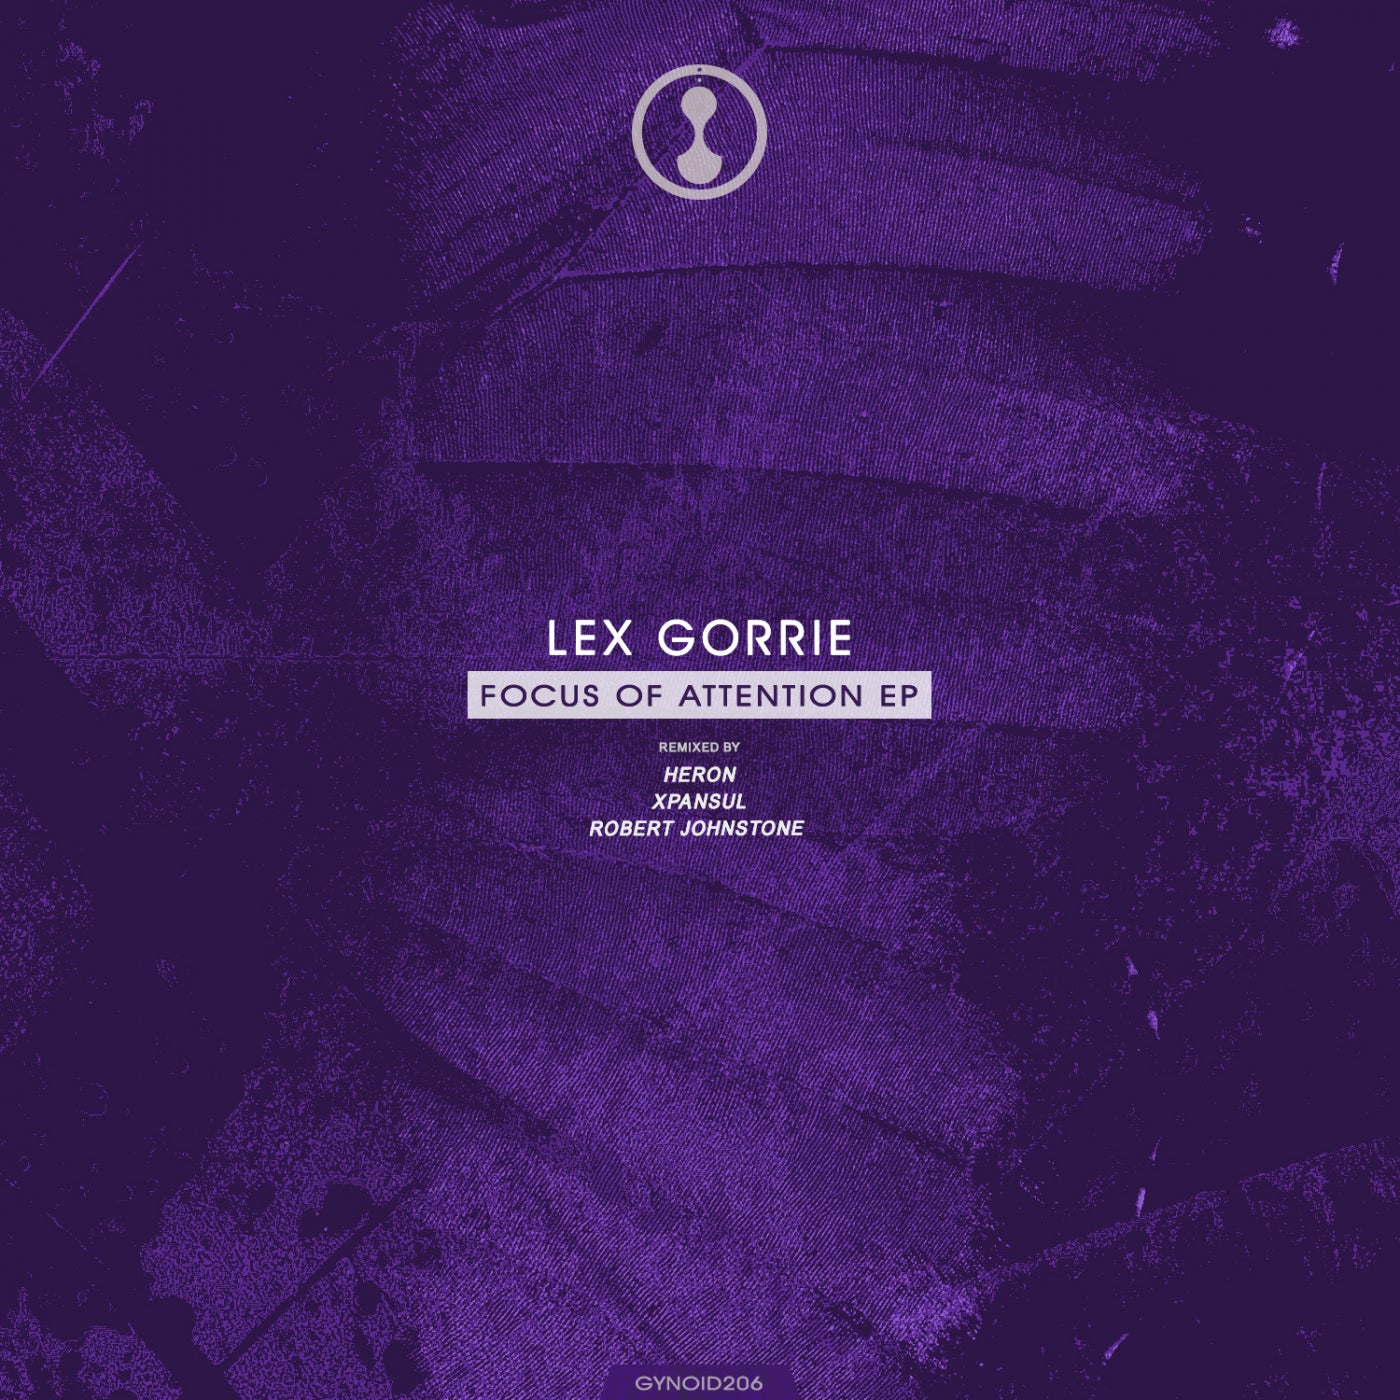 Lex Gorrie – Focus of Attention EP [GYNOID206]